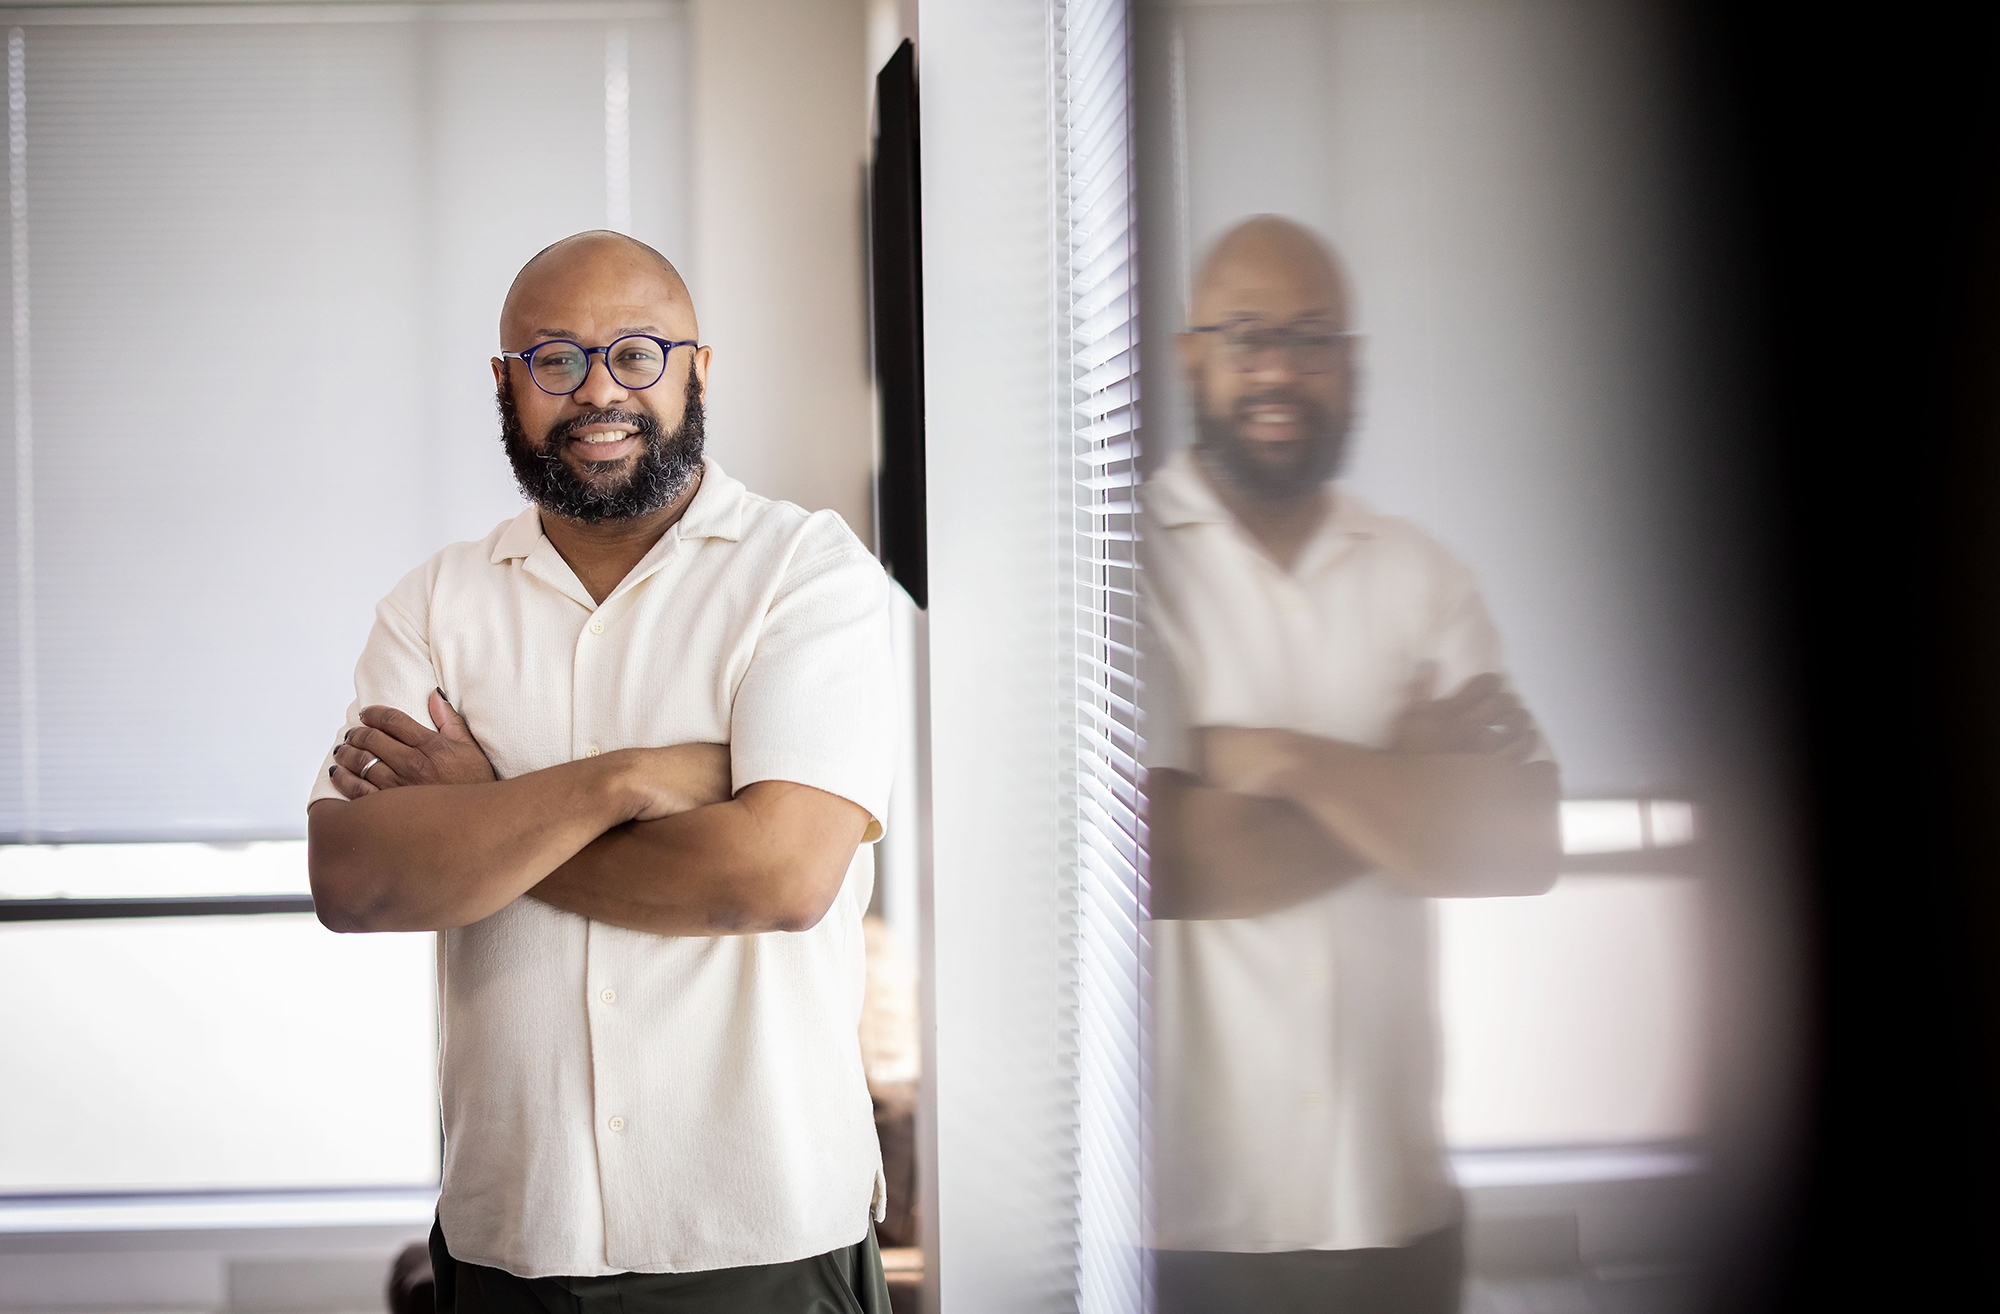 Desmond Patton stands with arms crossed in front of a window, which mirrors his image